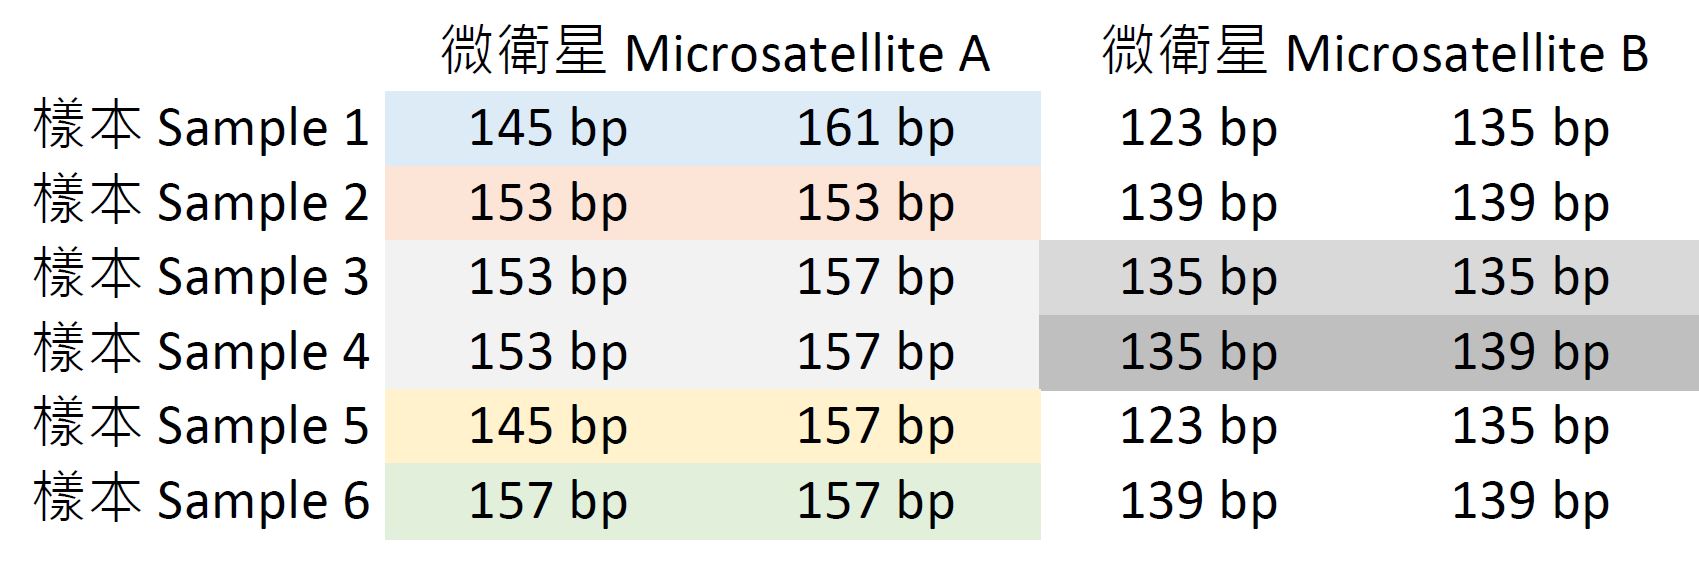 Paired data of two microsatellites of six genetic samples.